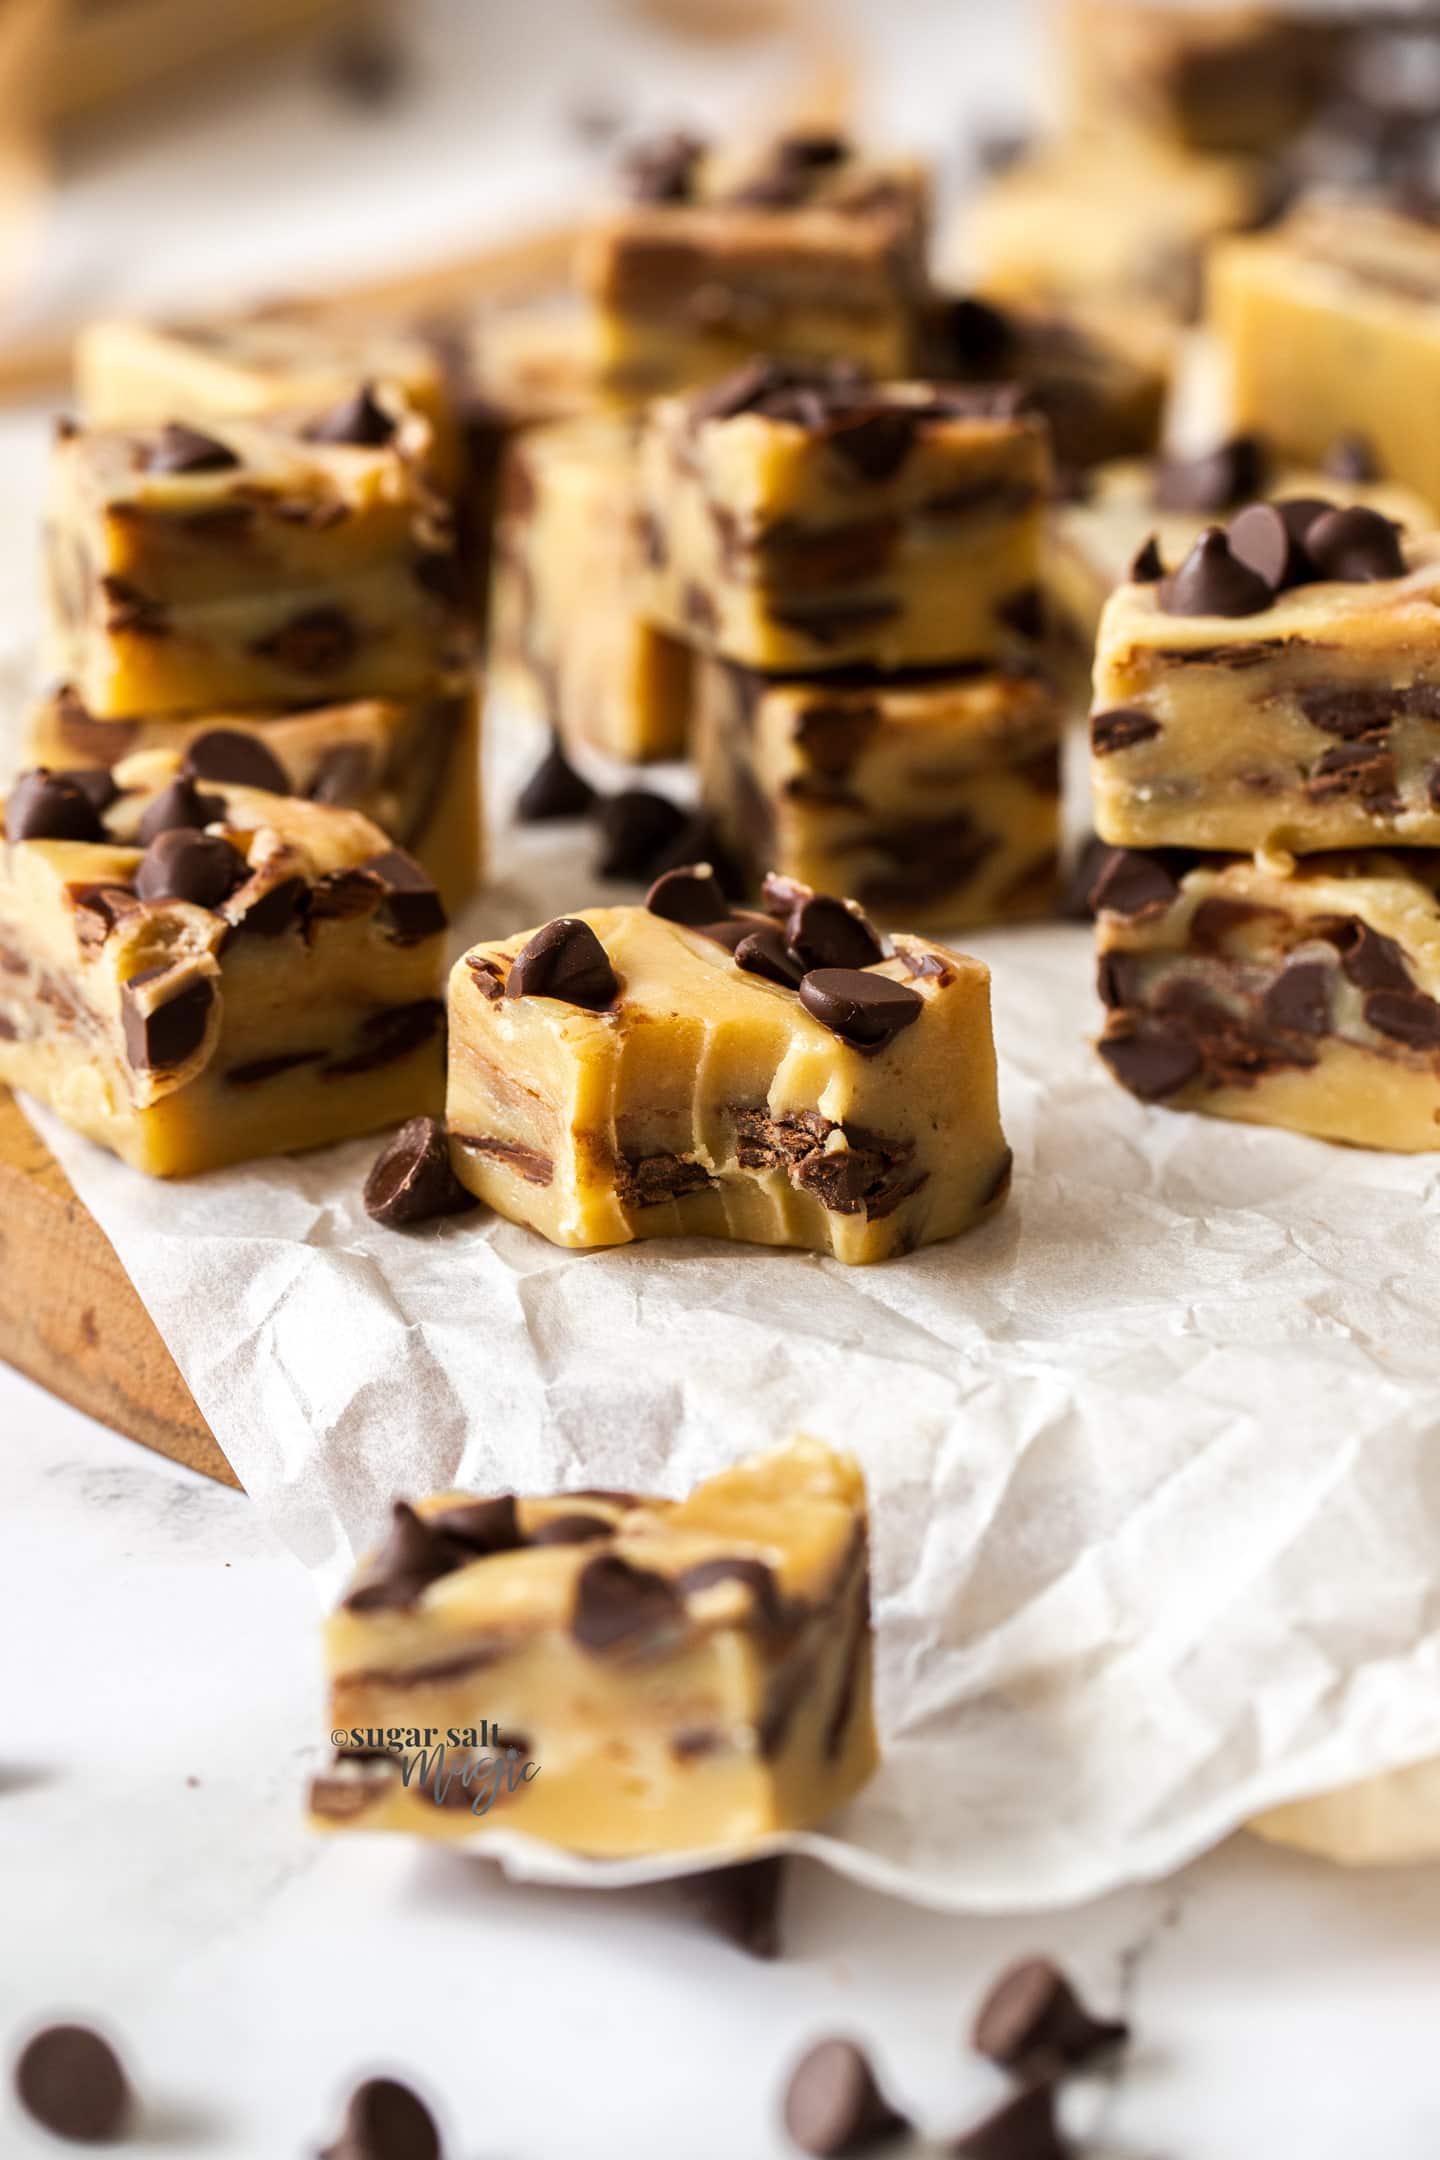 Squares of chocolate chip fudge on a sheet of baking paper. One with a bite taken out